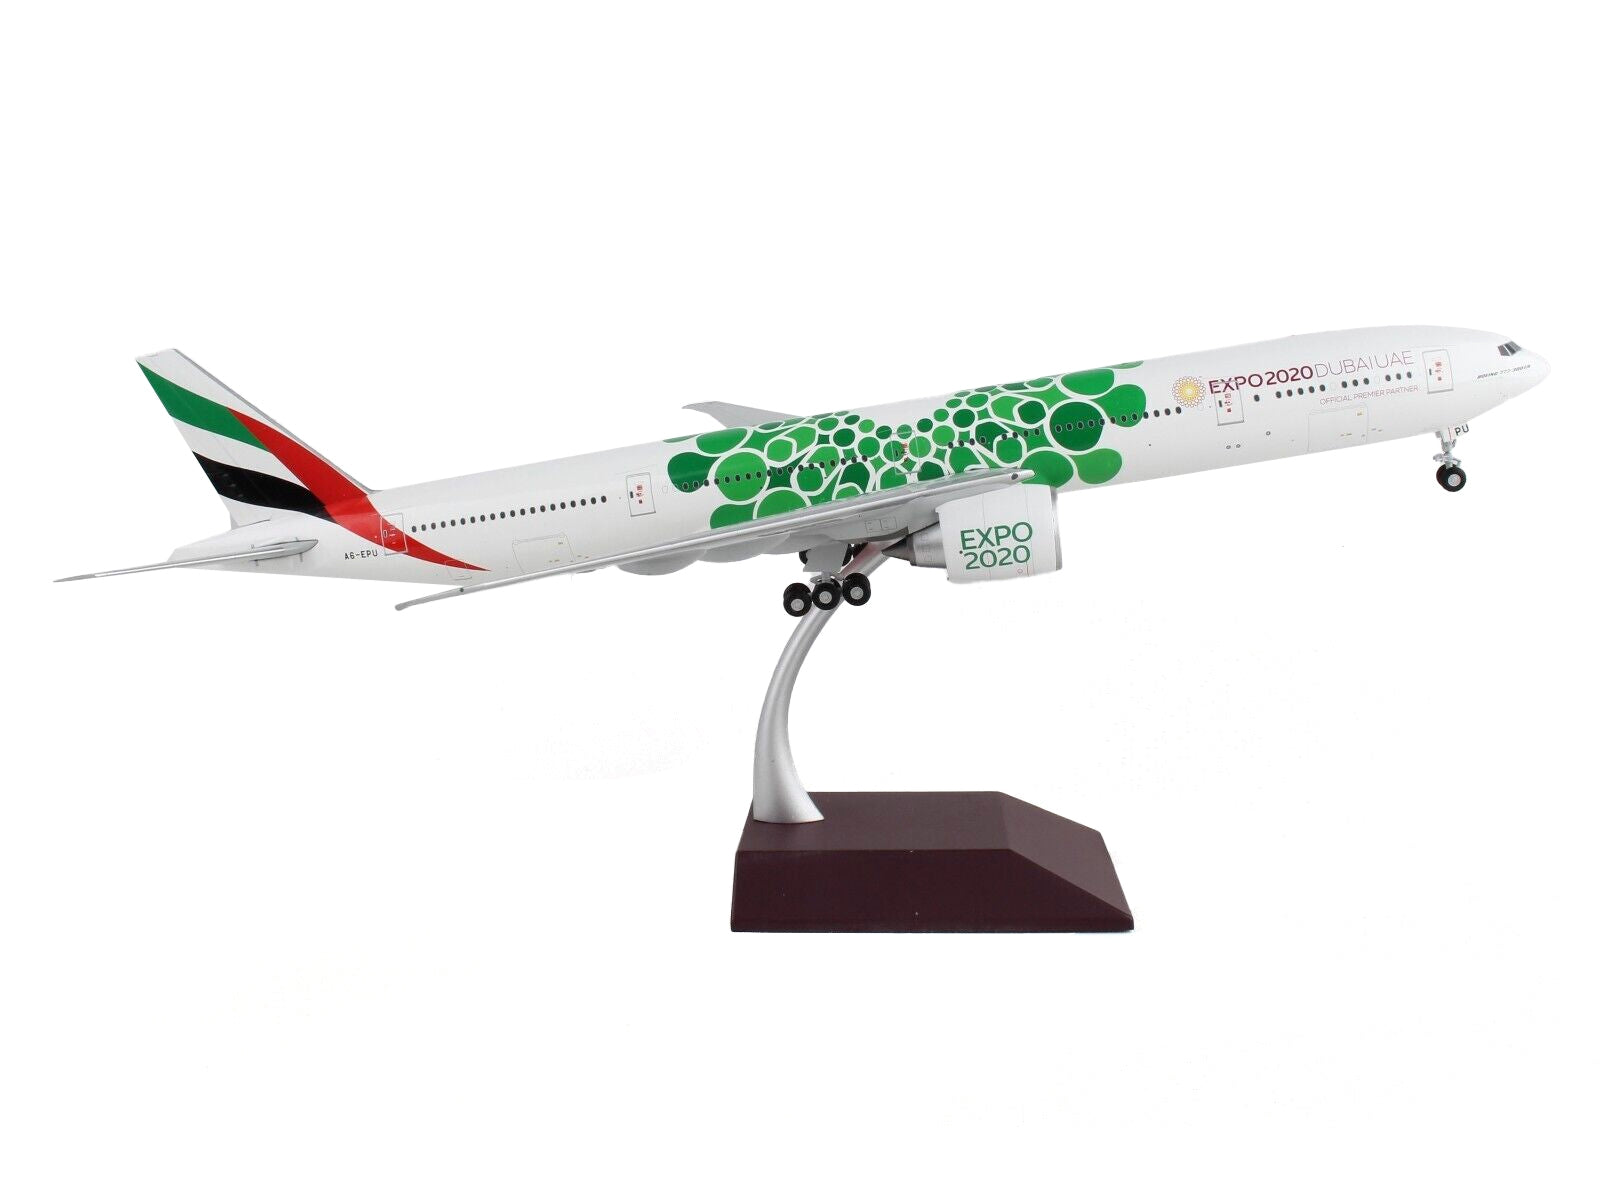 Boeing 777-300ER Commercial Aircraft "Emirates Airlines - Dubai Expo 2020" White with Green Graphics "Gemini 200" Series 1/200 Diecast Model Airplane by GeminiJets